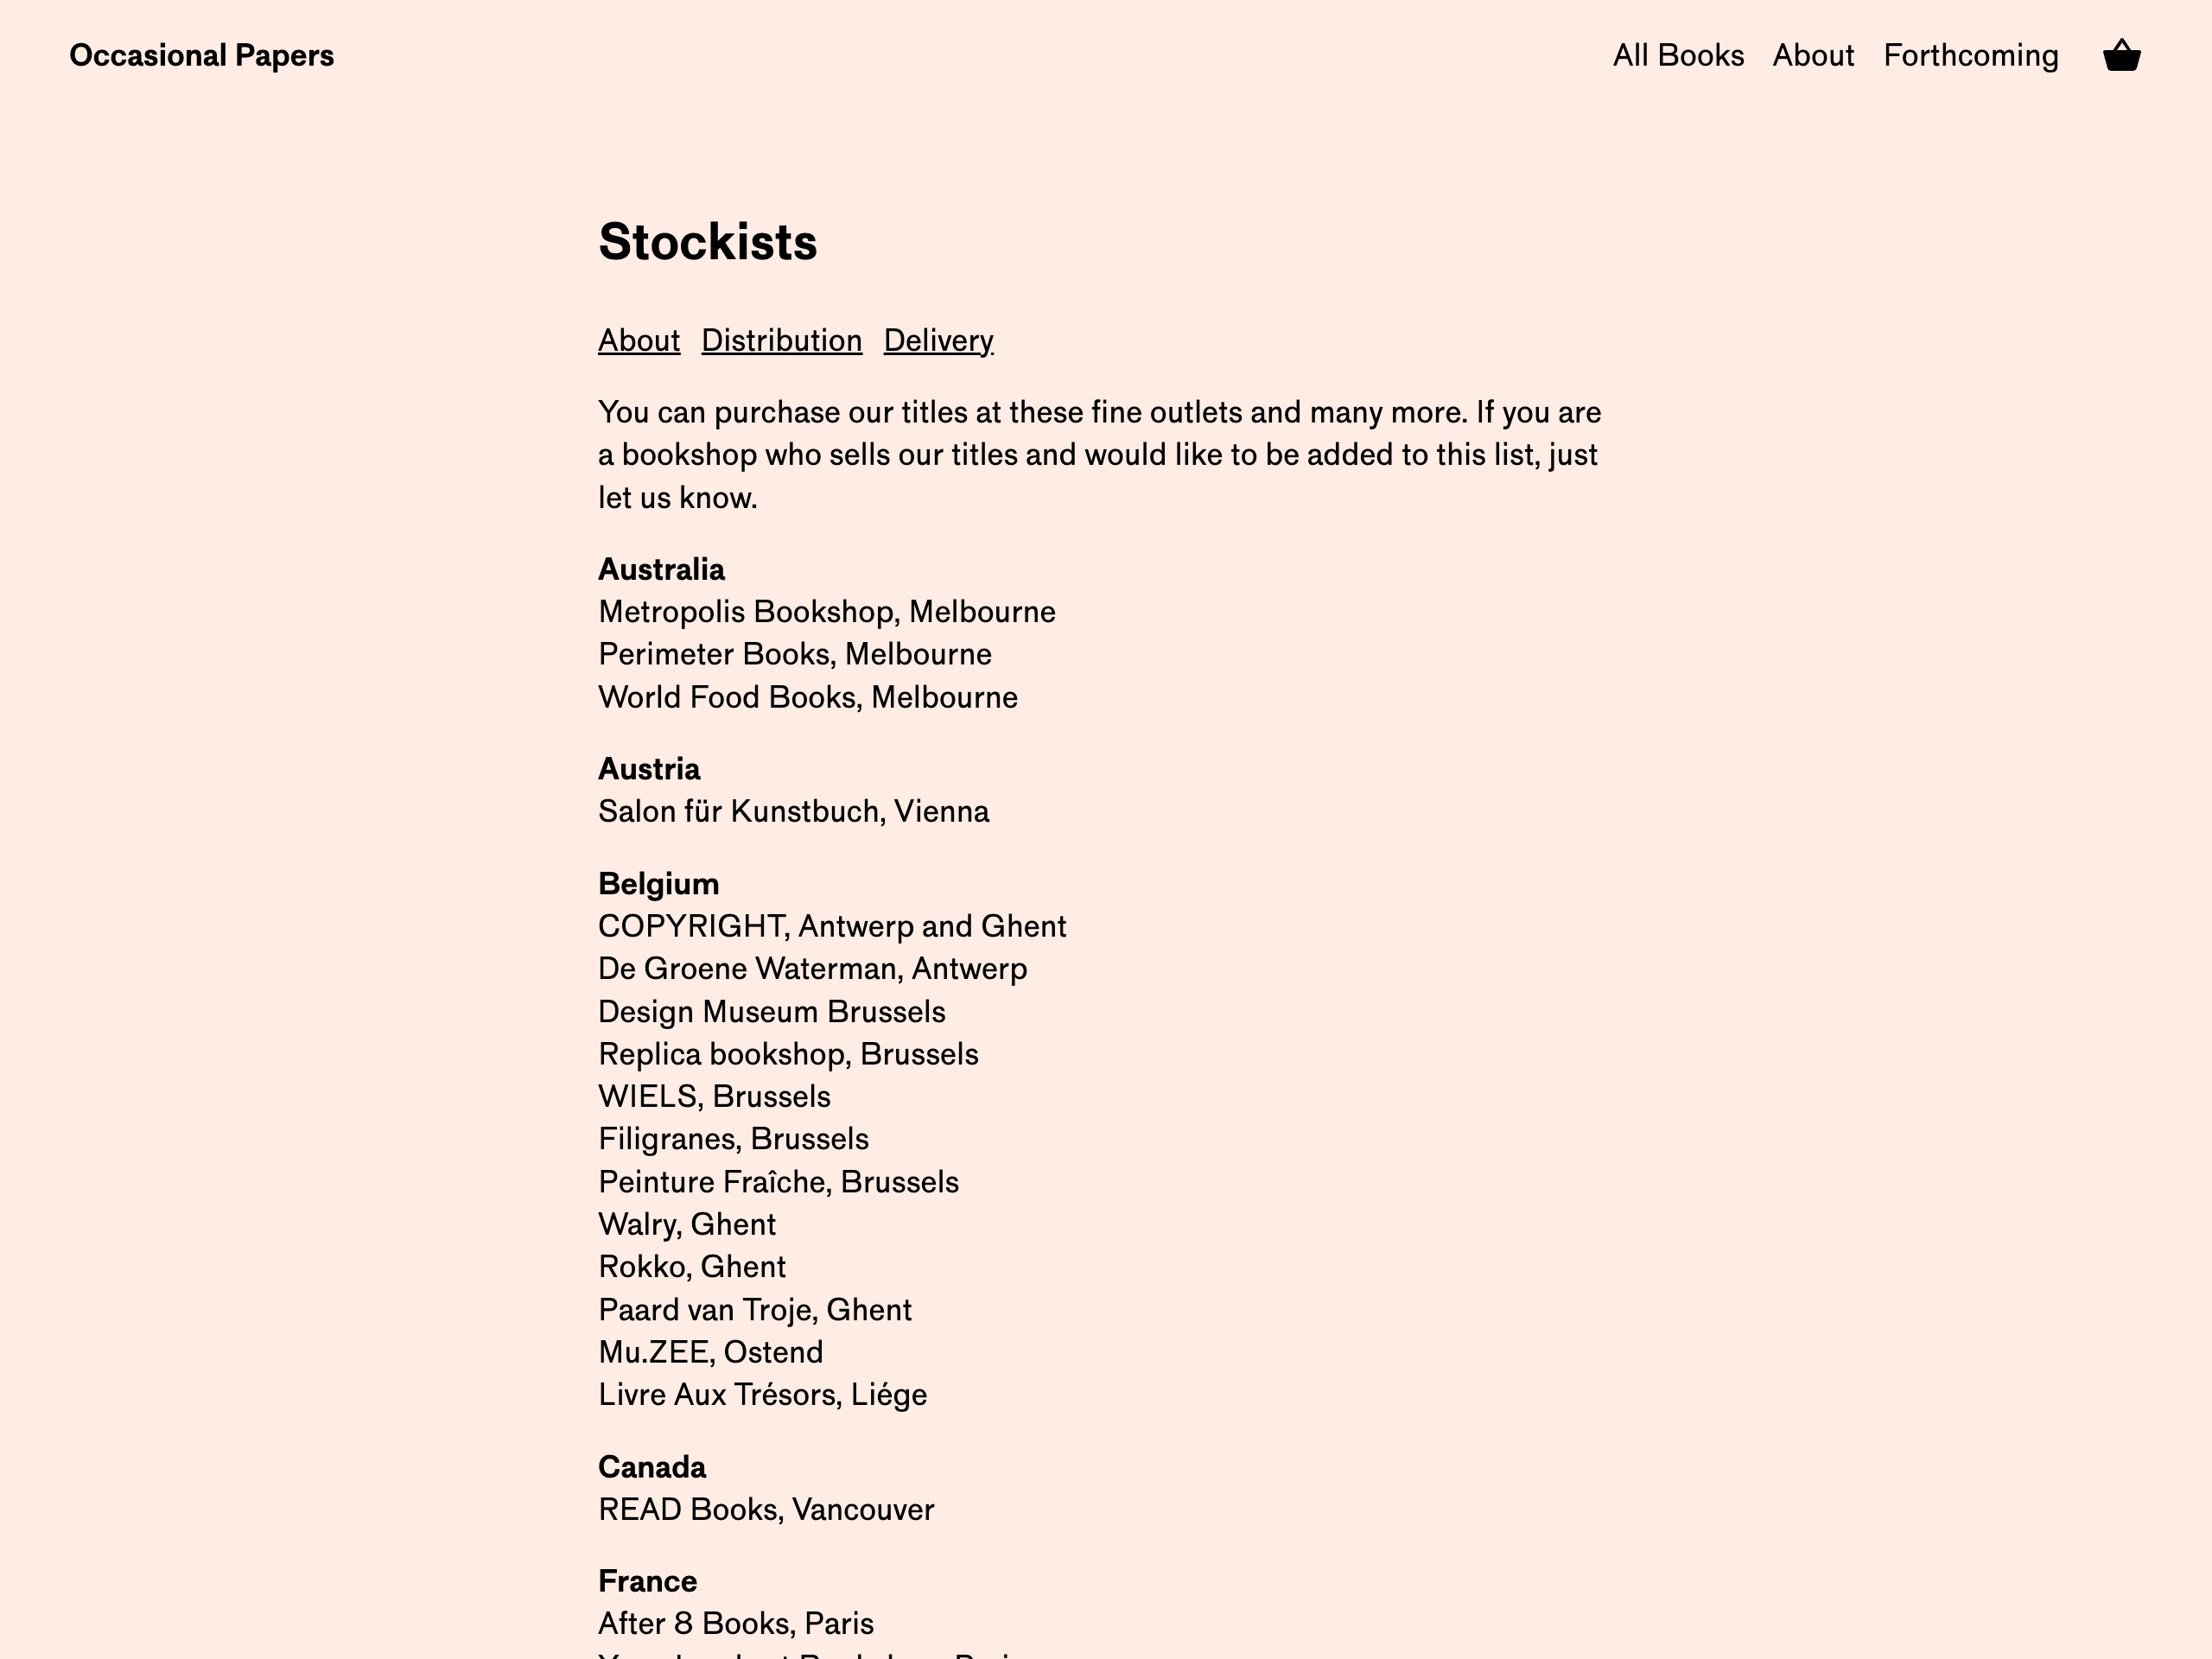 Stockists page